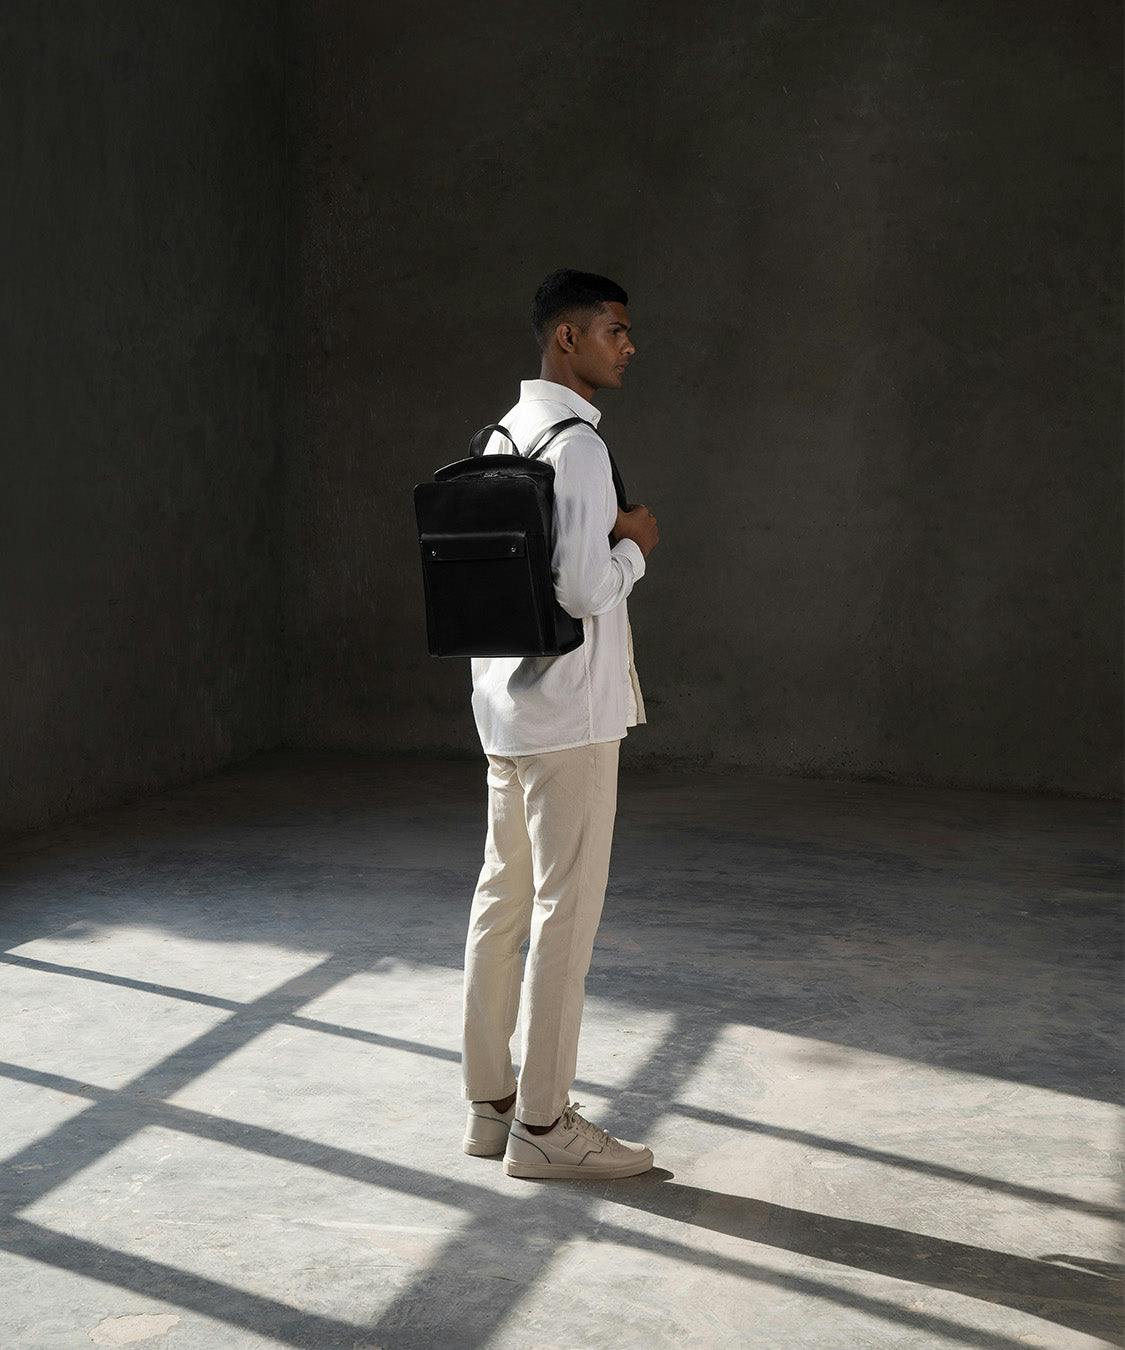 ADLER BACKPACK - Black, a product by Kelby Huston